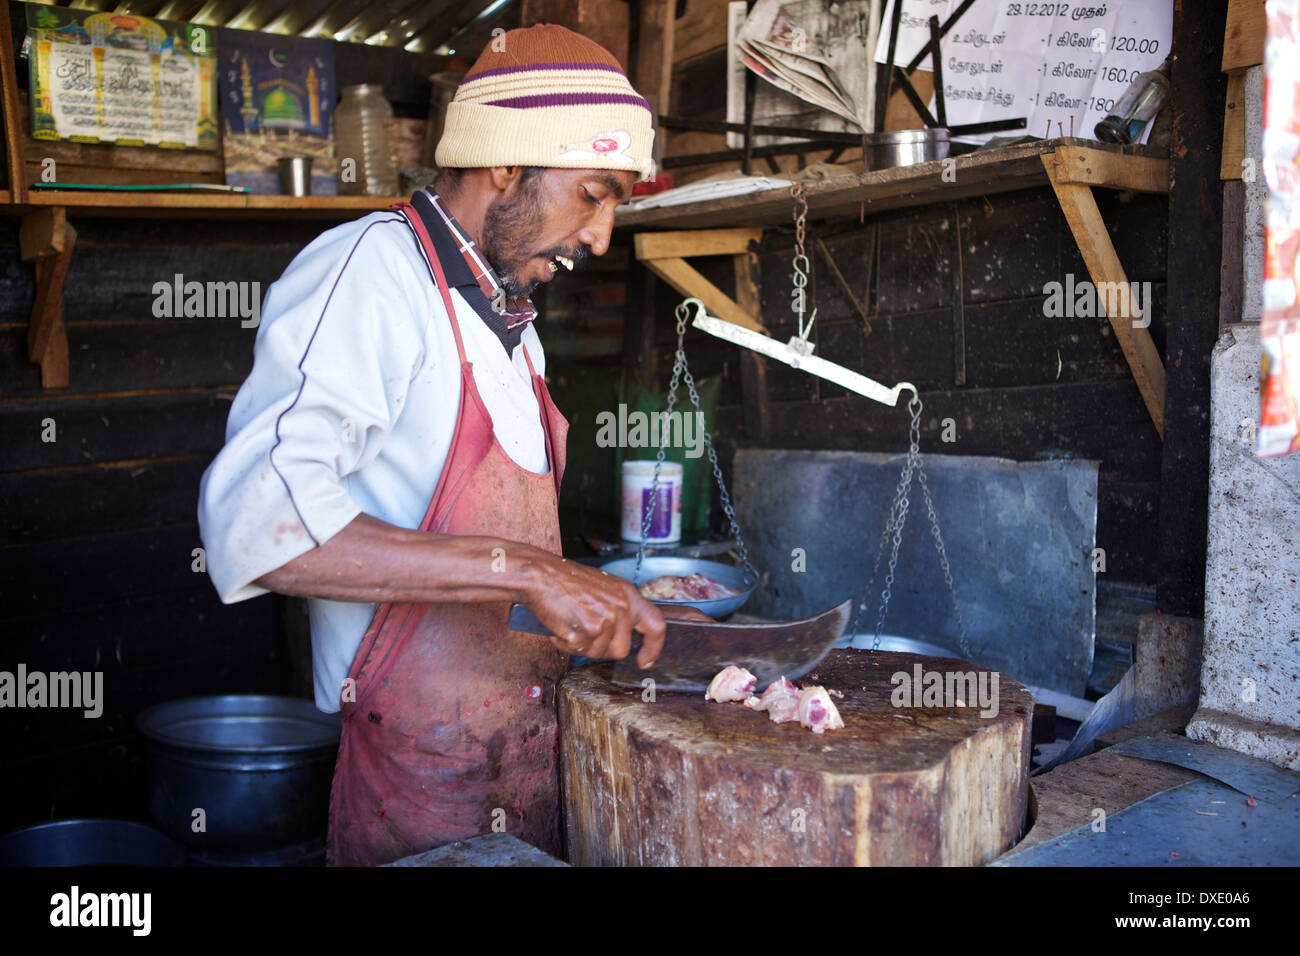 Image of Butcher In a Meat Vending Stall In India-AV635649-Picxy